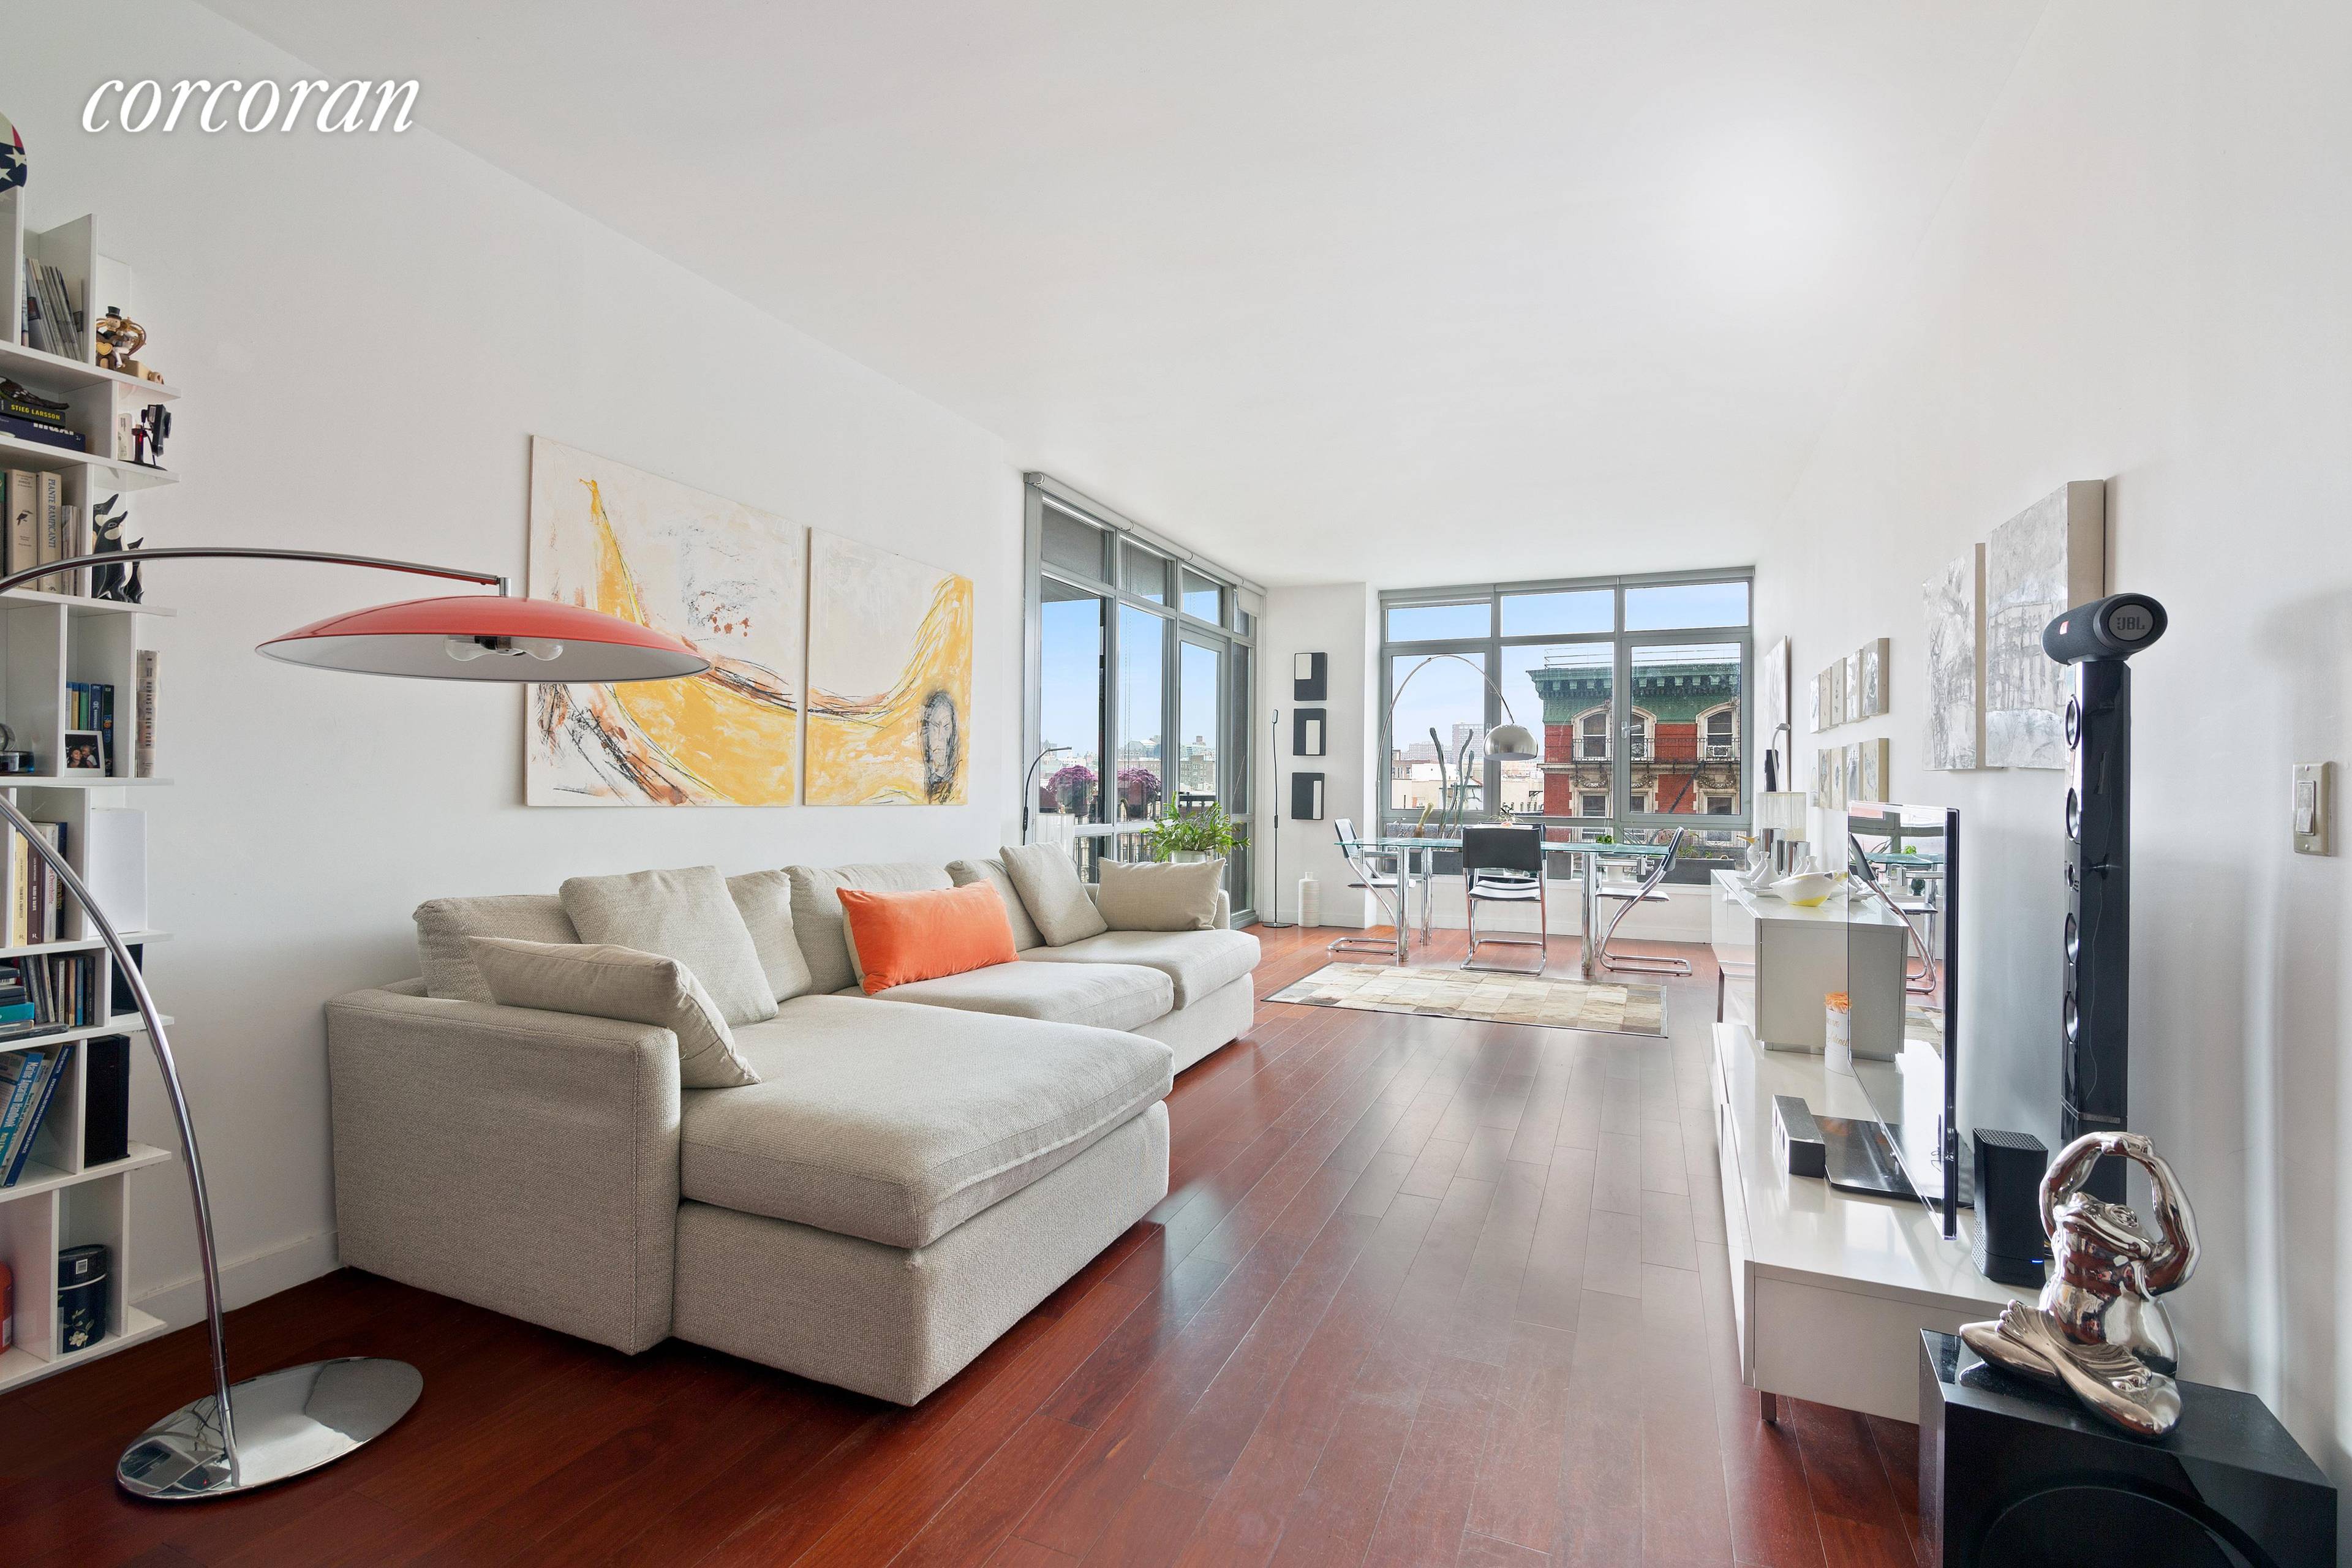 Incredible walls of glass welcome you to this oversized two bedroom, two bathroom residence in one of HarlemA s most desirable, white glove condominiums.